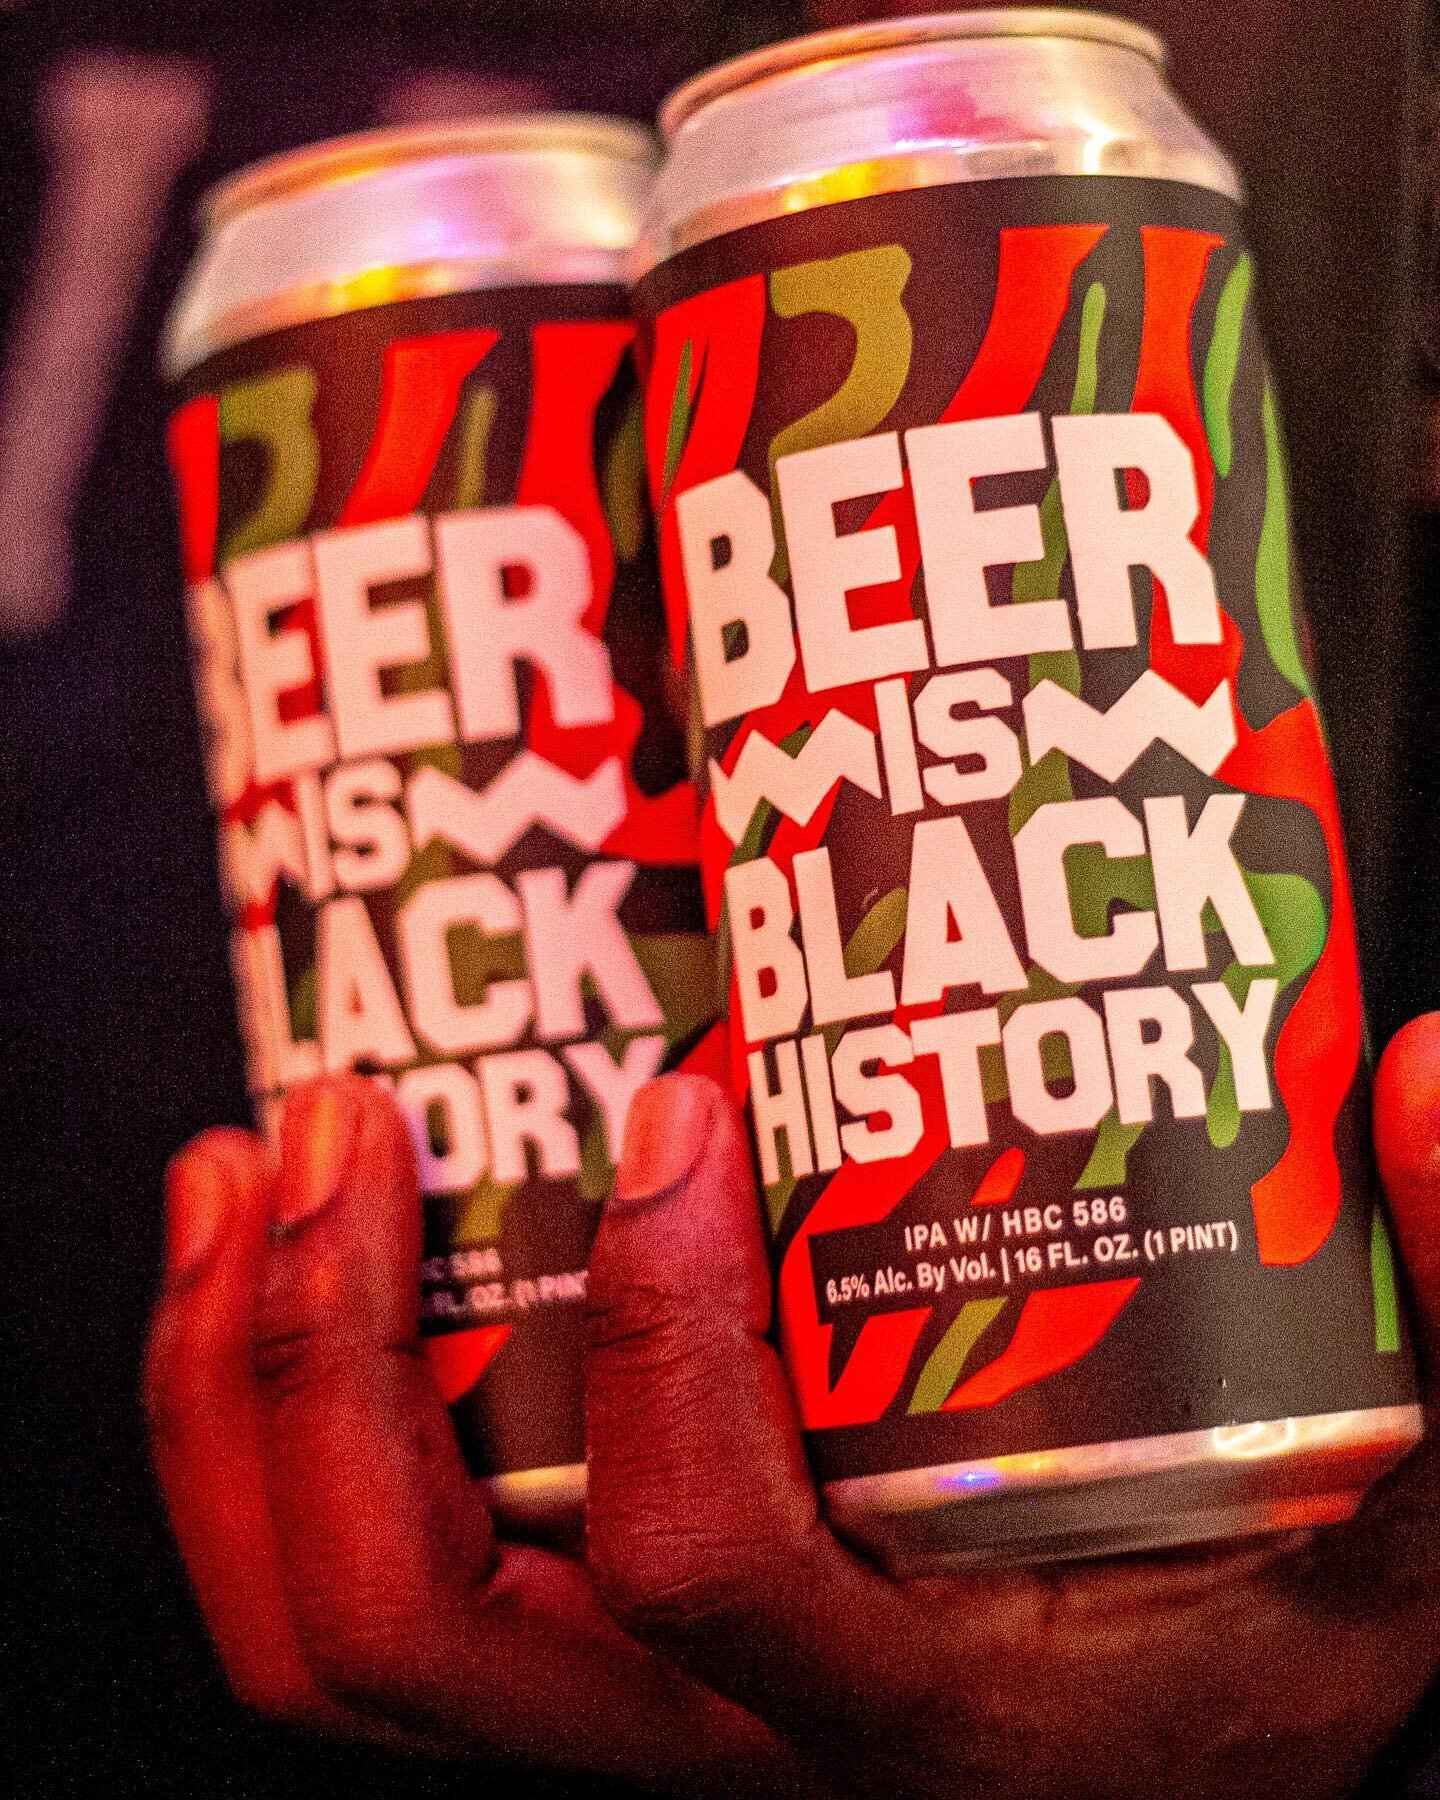 Was just going through my camera and found this gem I took at @sessionson15th during BLM. 

One of America&rsquo;s first craft brewers was Peter Hemings, a man enslaved by Thomas Jefferson. We BEEN out here. 👋🏾👋🏾👋🏾👋🏾

.
.
.
.
#craftcocktails 